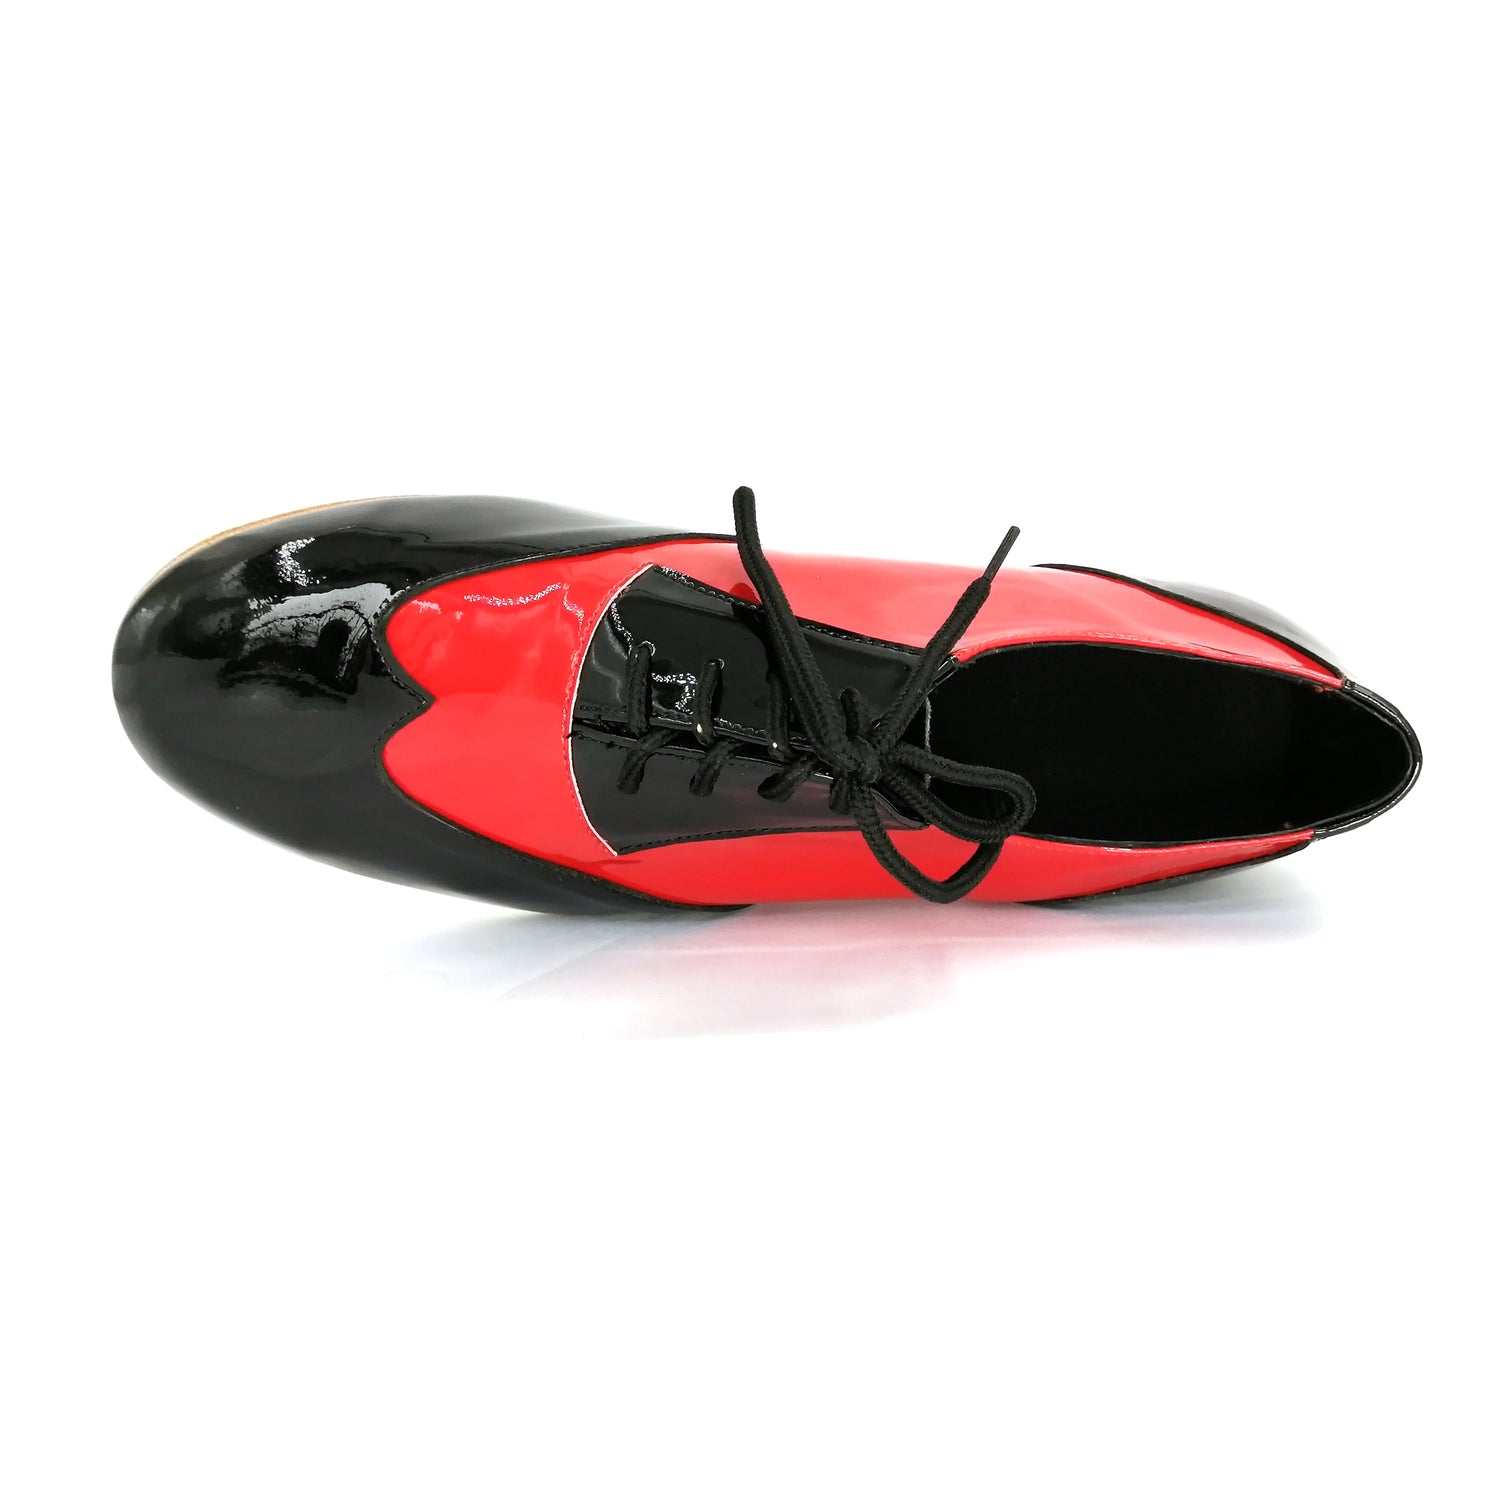 Pro Dancer Men's Tango Shoes with 1 inch Heel Leather Lace-up in Red and Black2